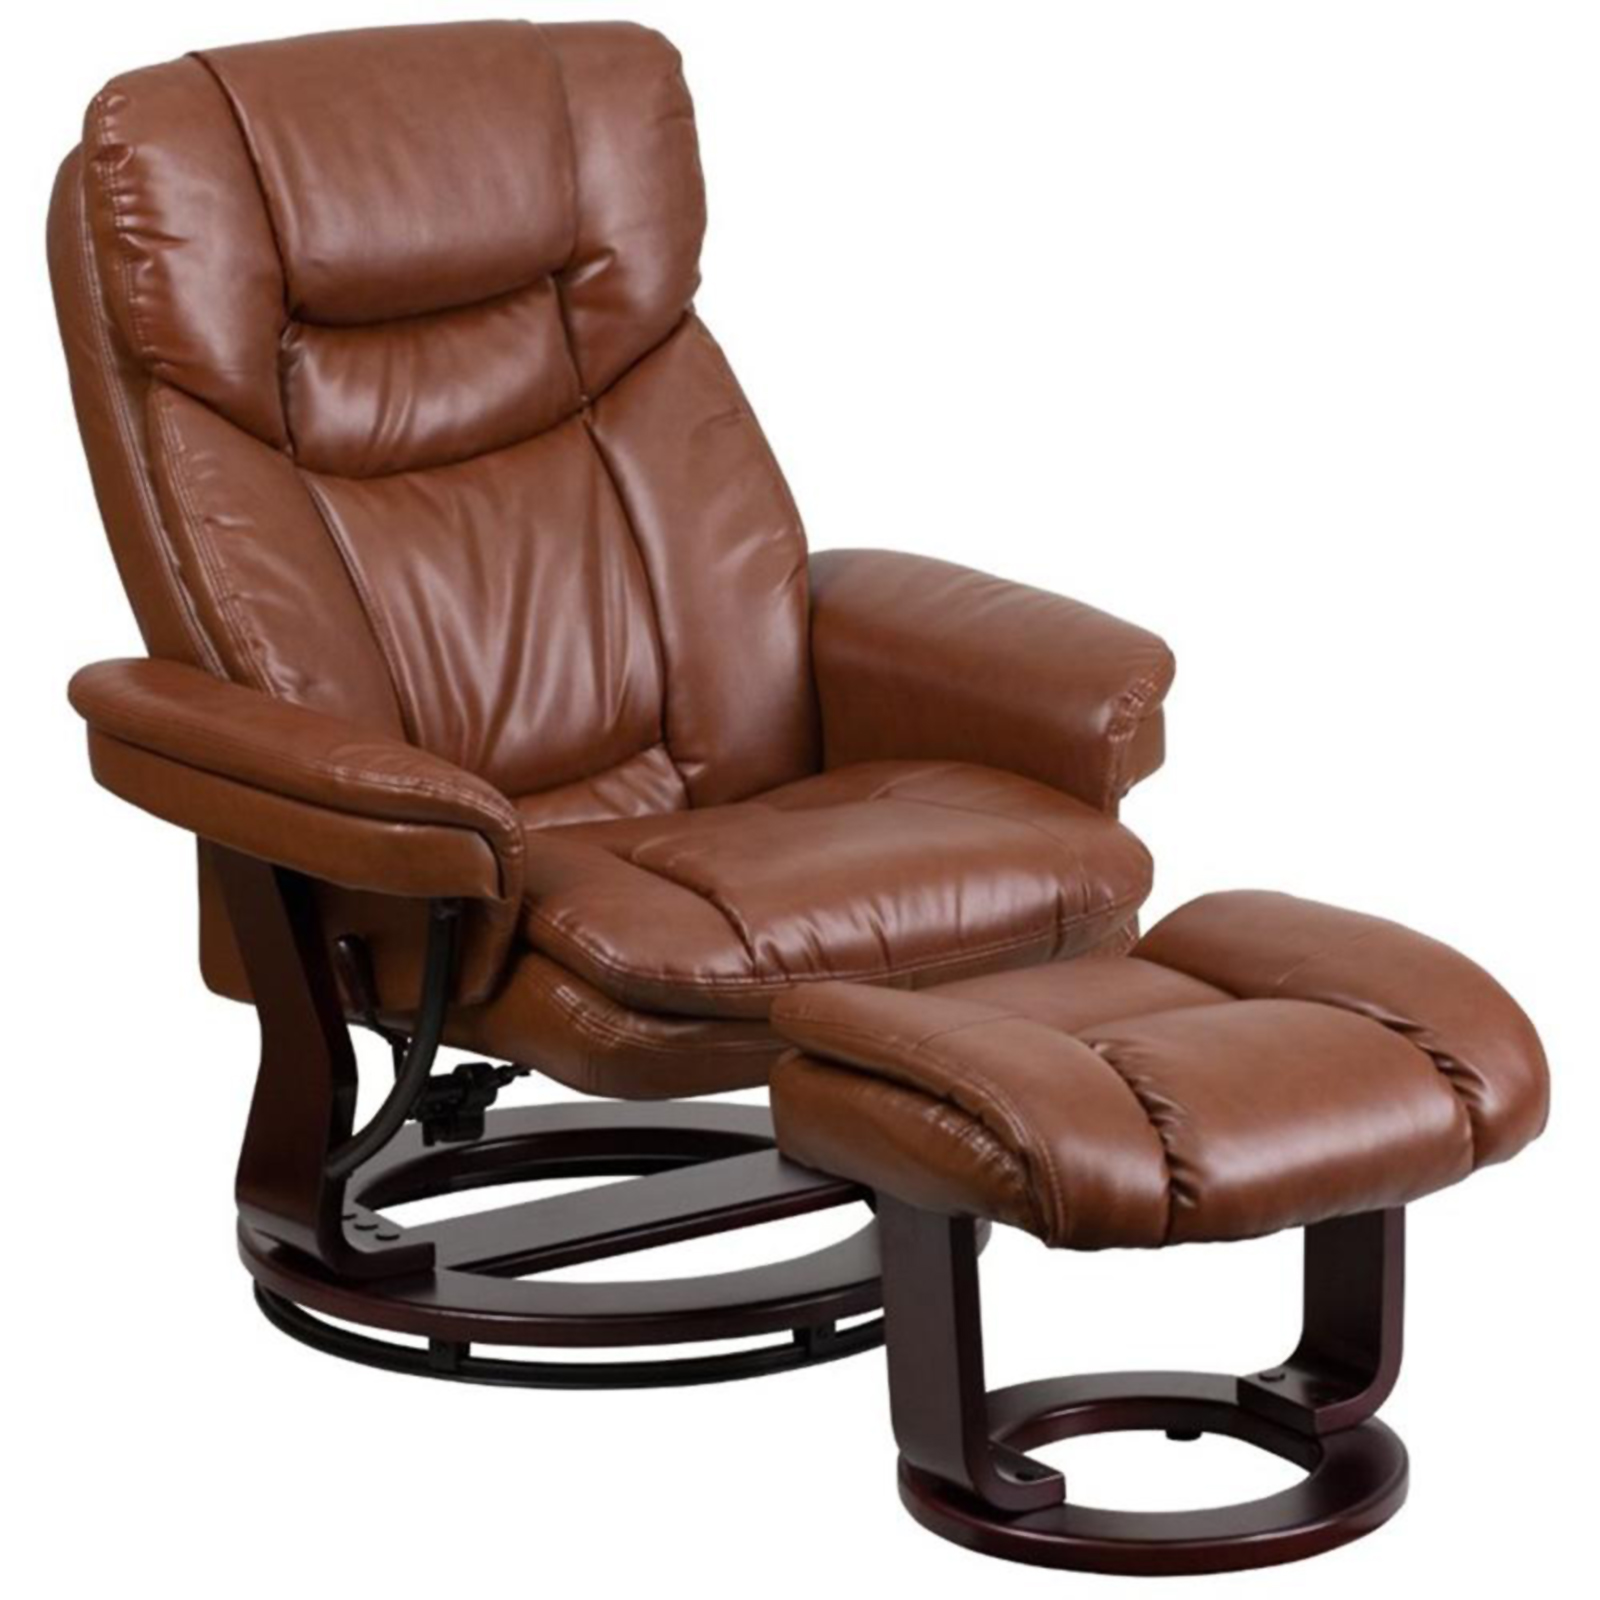 Flash Furniture Contemporary Leather Recliner with Ottoman - Vintage Brown